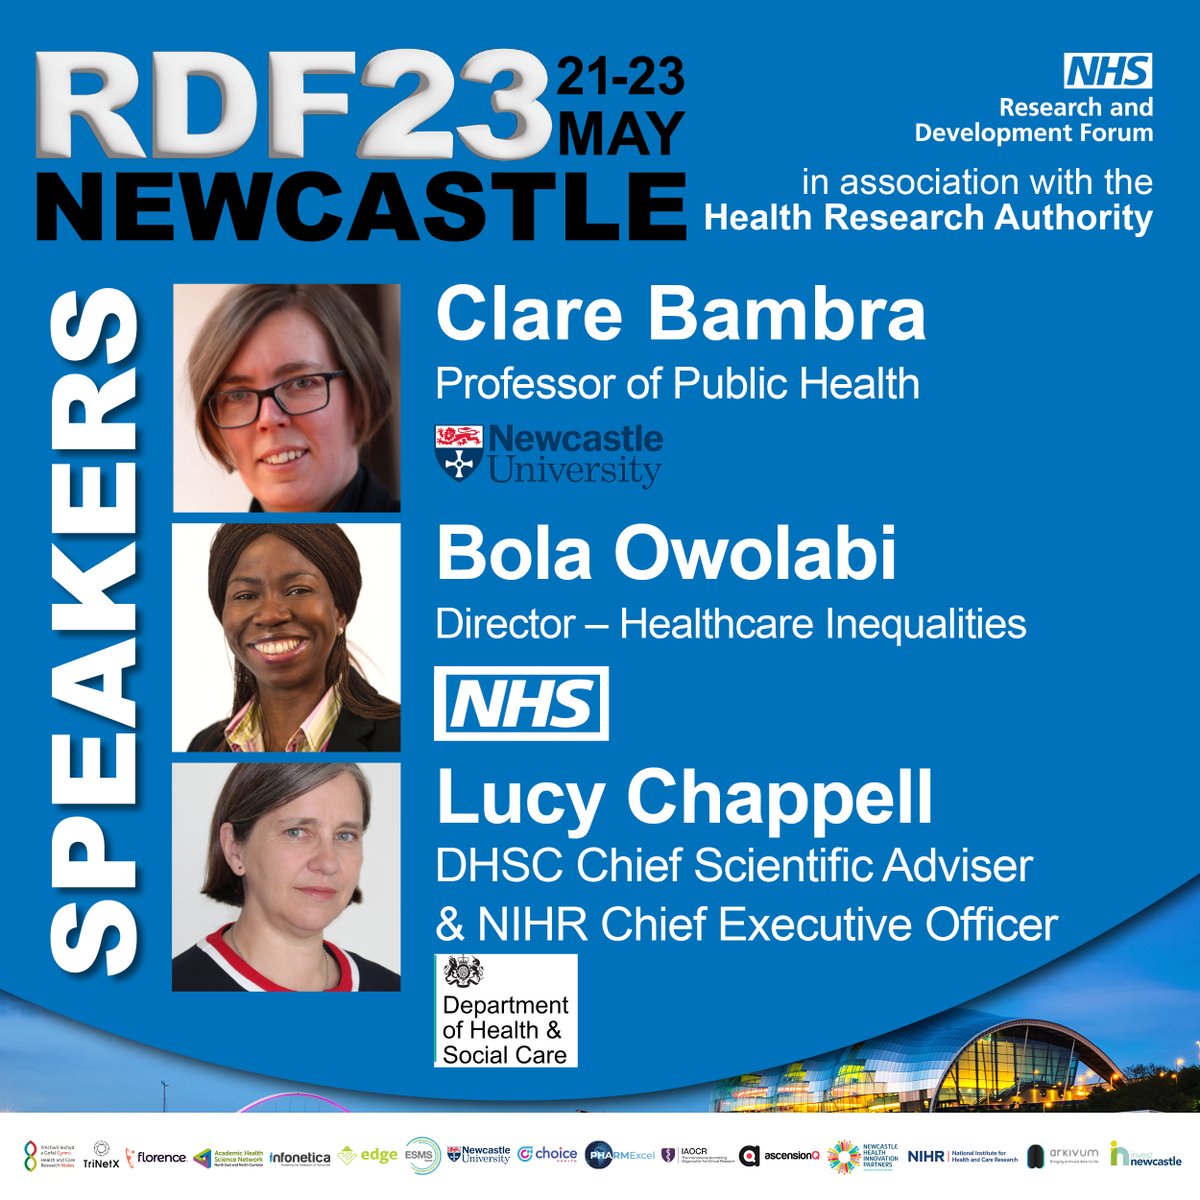 The @NHSRDForum is delighted to announce that Clare Bambra, Bola Owolabi and Lucy Chappell will be presenting the opening keynote on how research tackles inequalities at RDF23.

Find out more: rdforum.nhs.uk/rdf23-programm…

#nhs #nhsresearch #covidresearch #rdf23